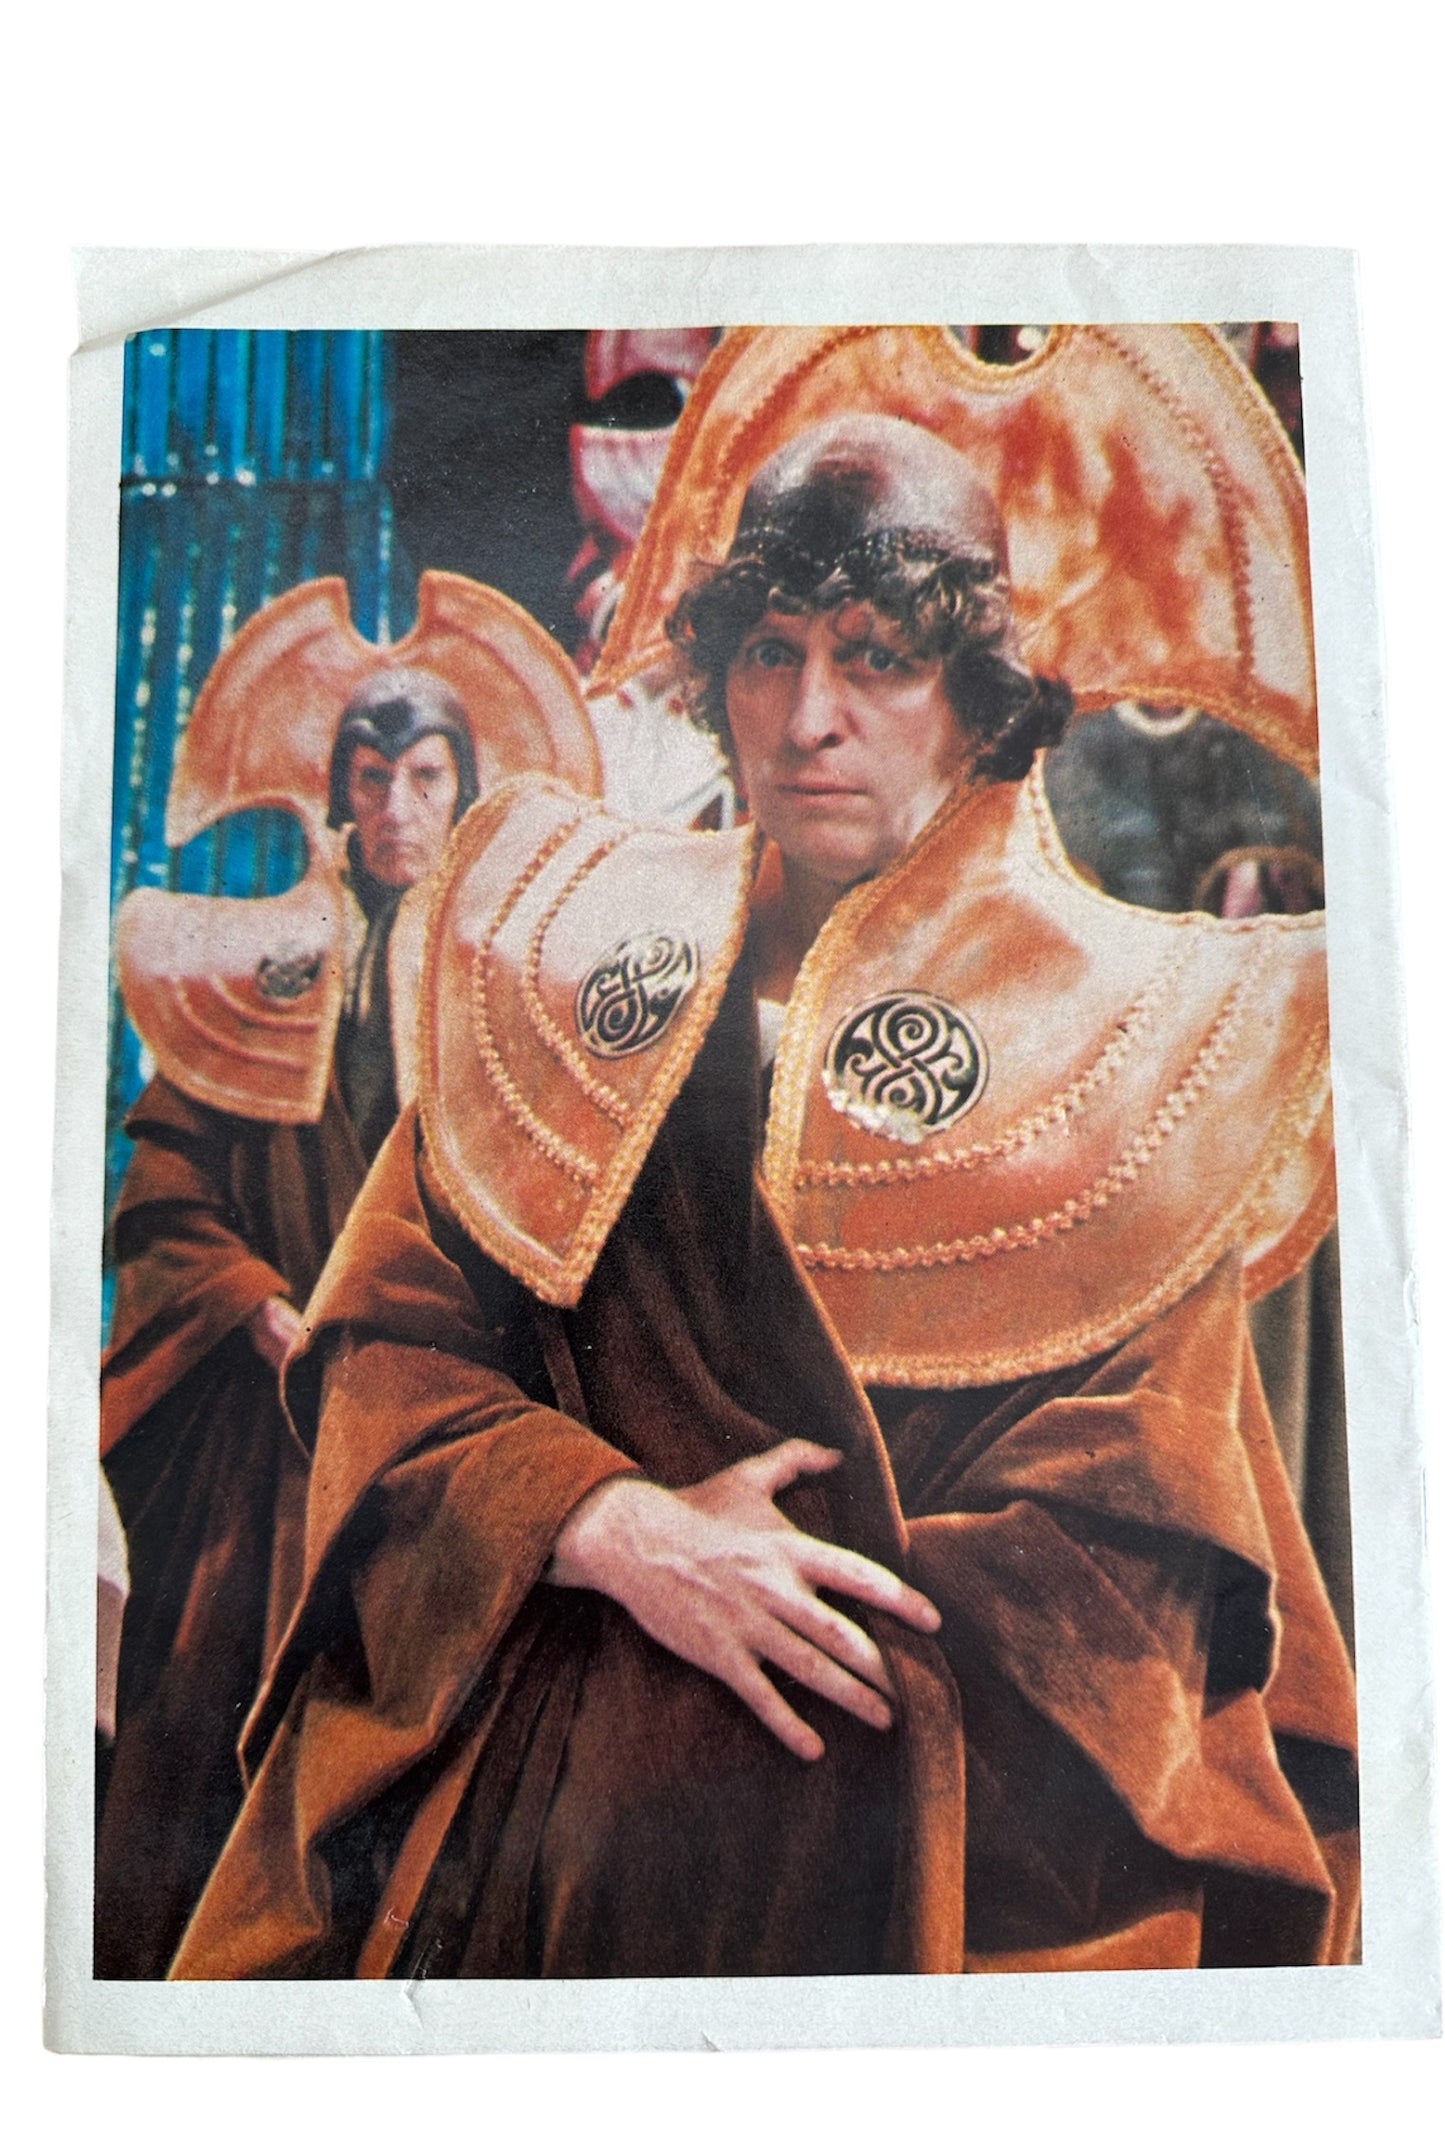 Vintage 1979 Doctor Dr Who Weekly Comic Magazine Number 4 - Fantastic Fourth Issue -  Nov 7th 1979 - Former Shop Stock